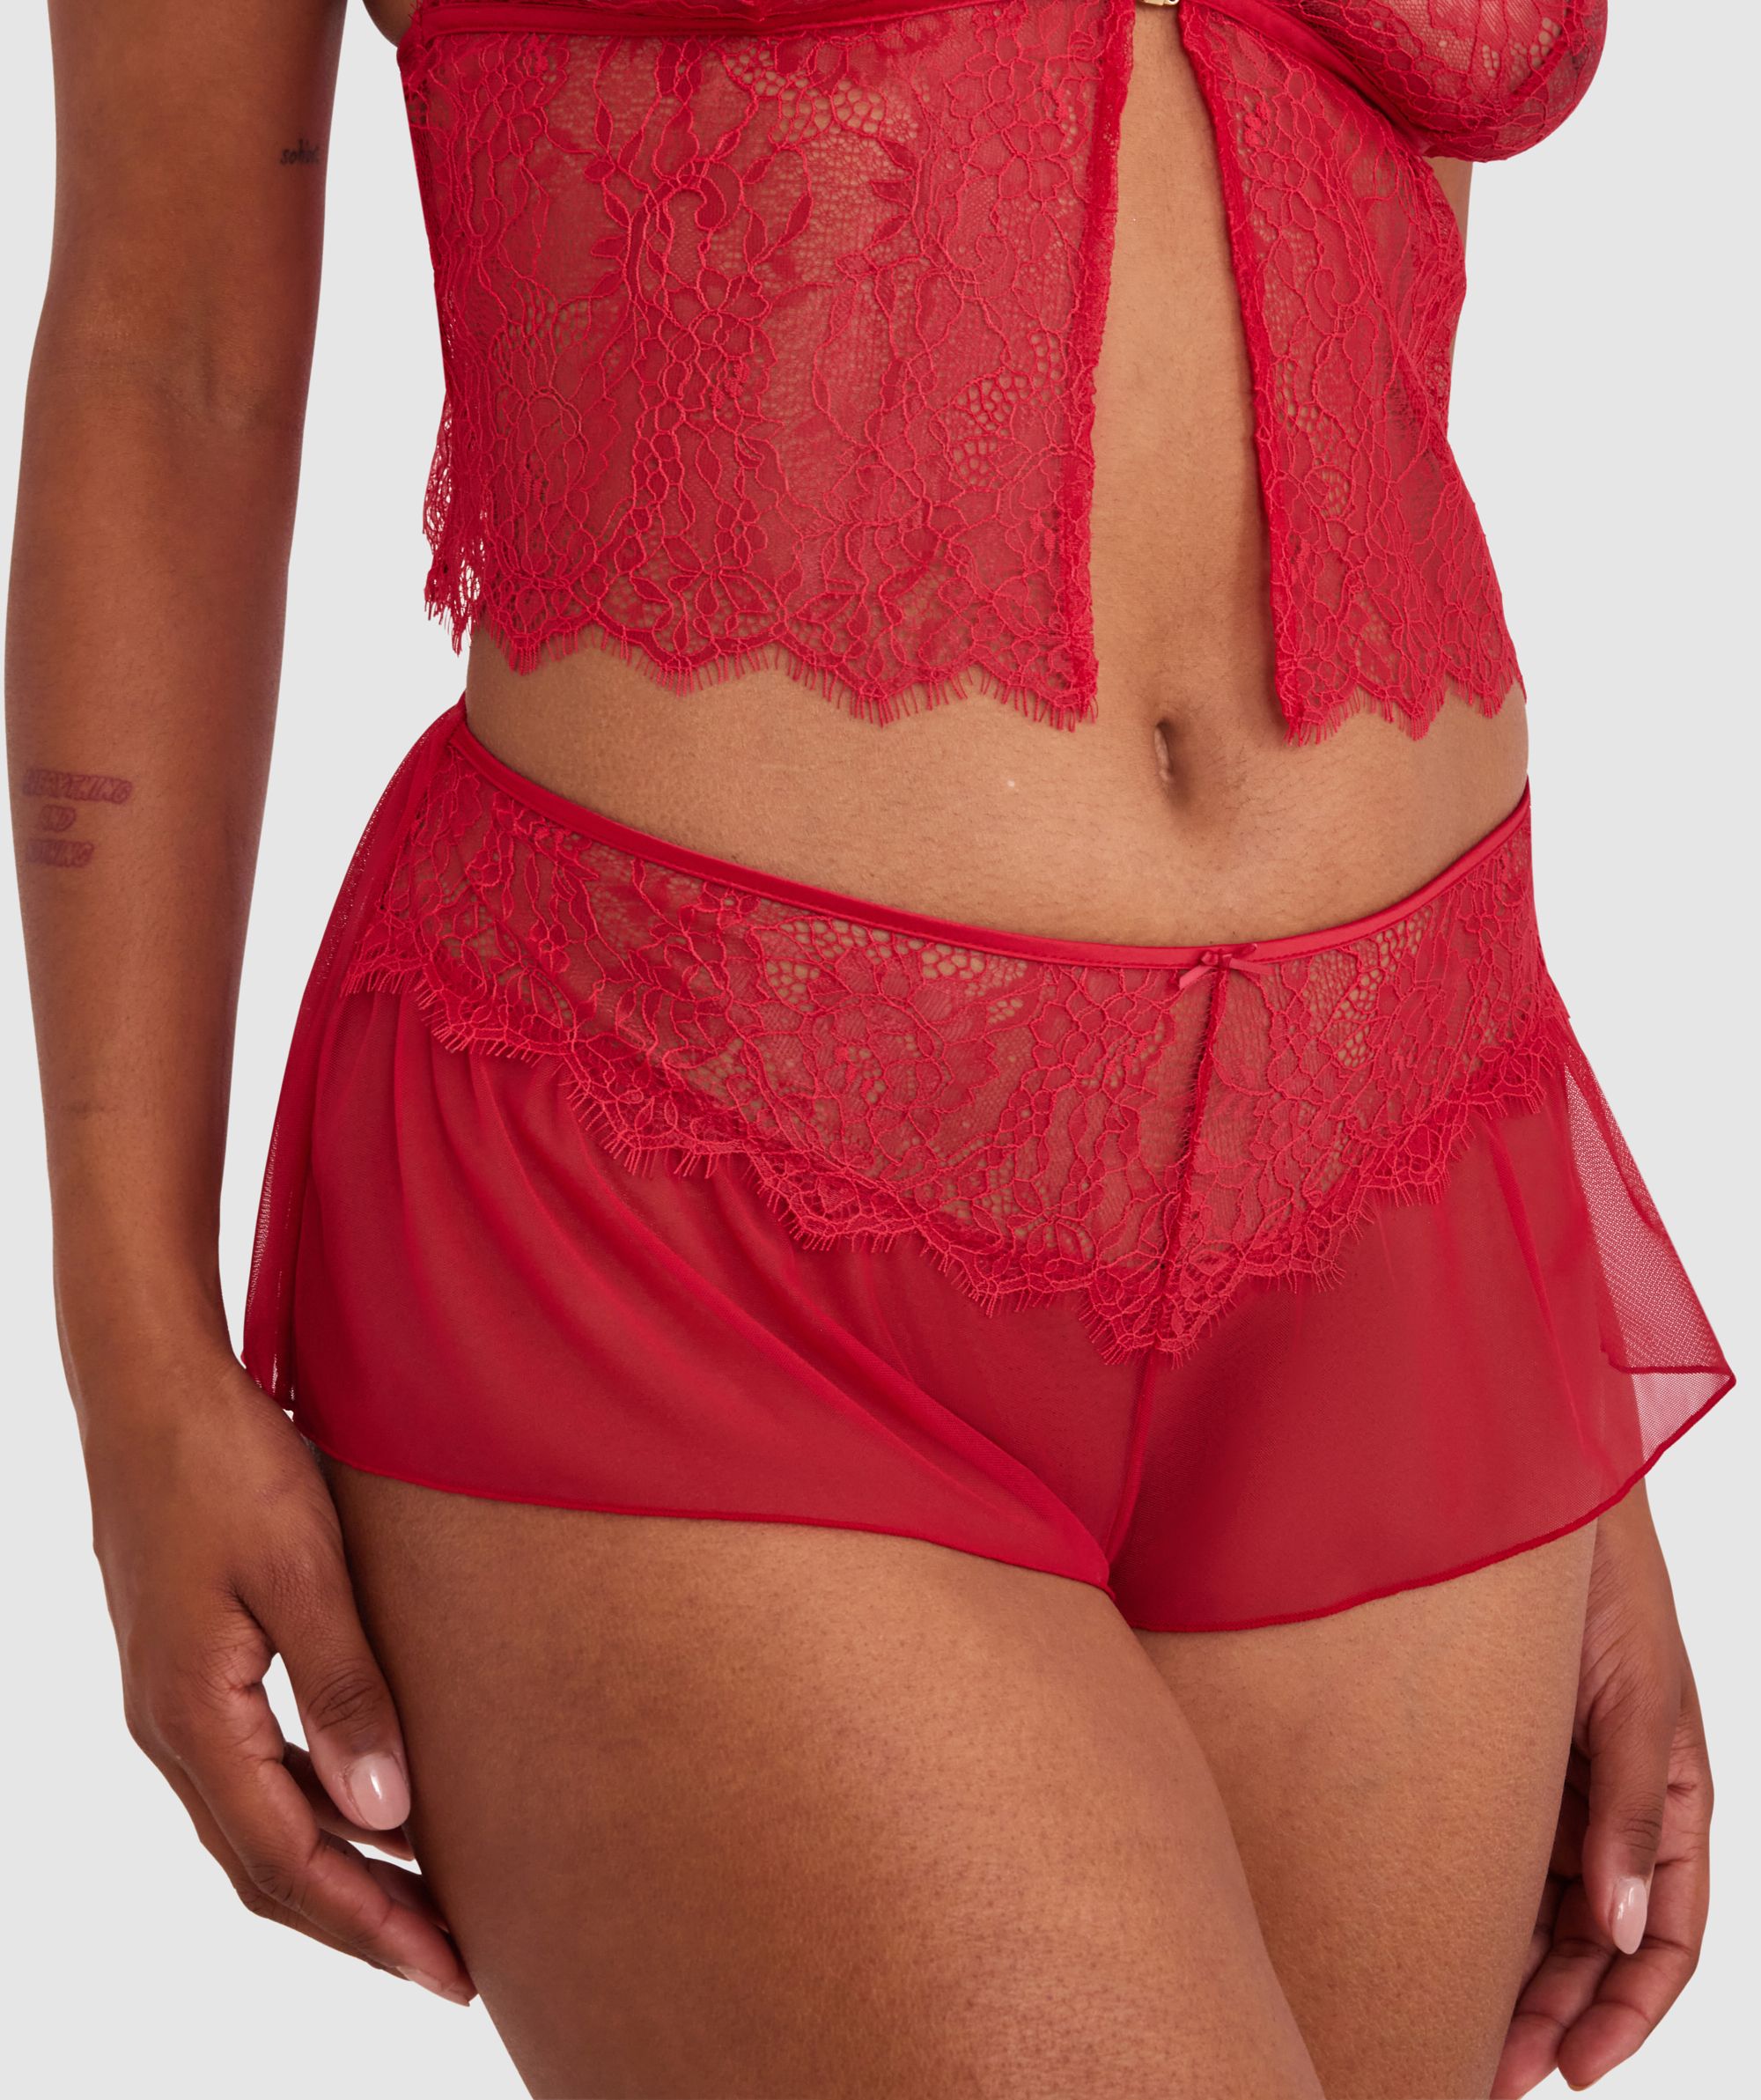 Bras N Things Night Games Mystic French Knicker - Red